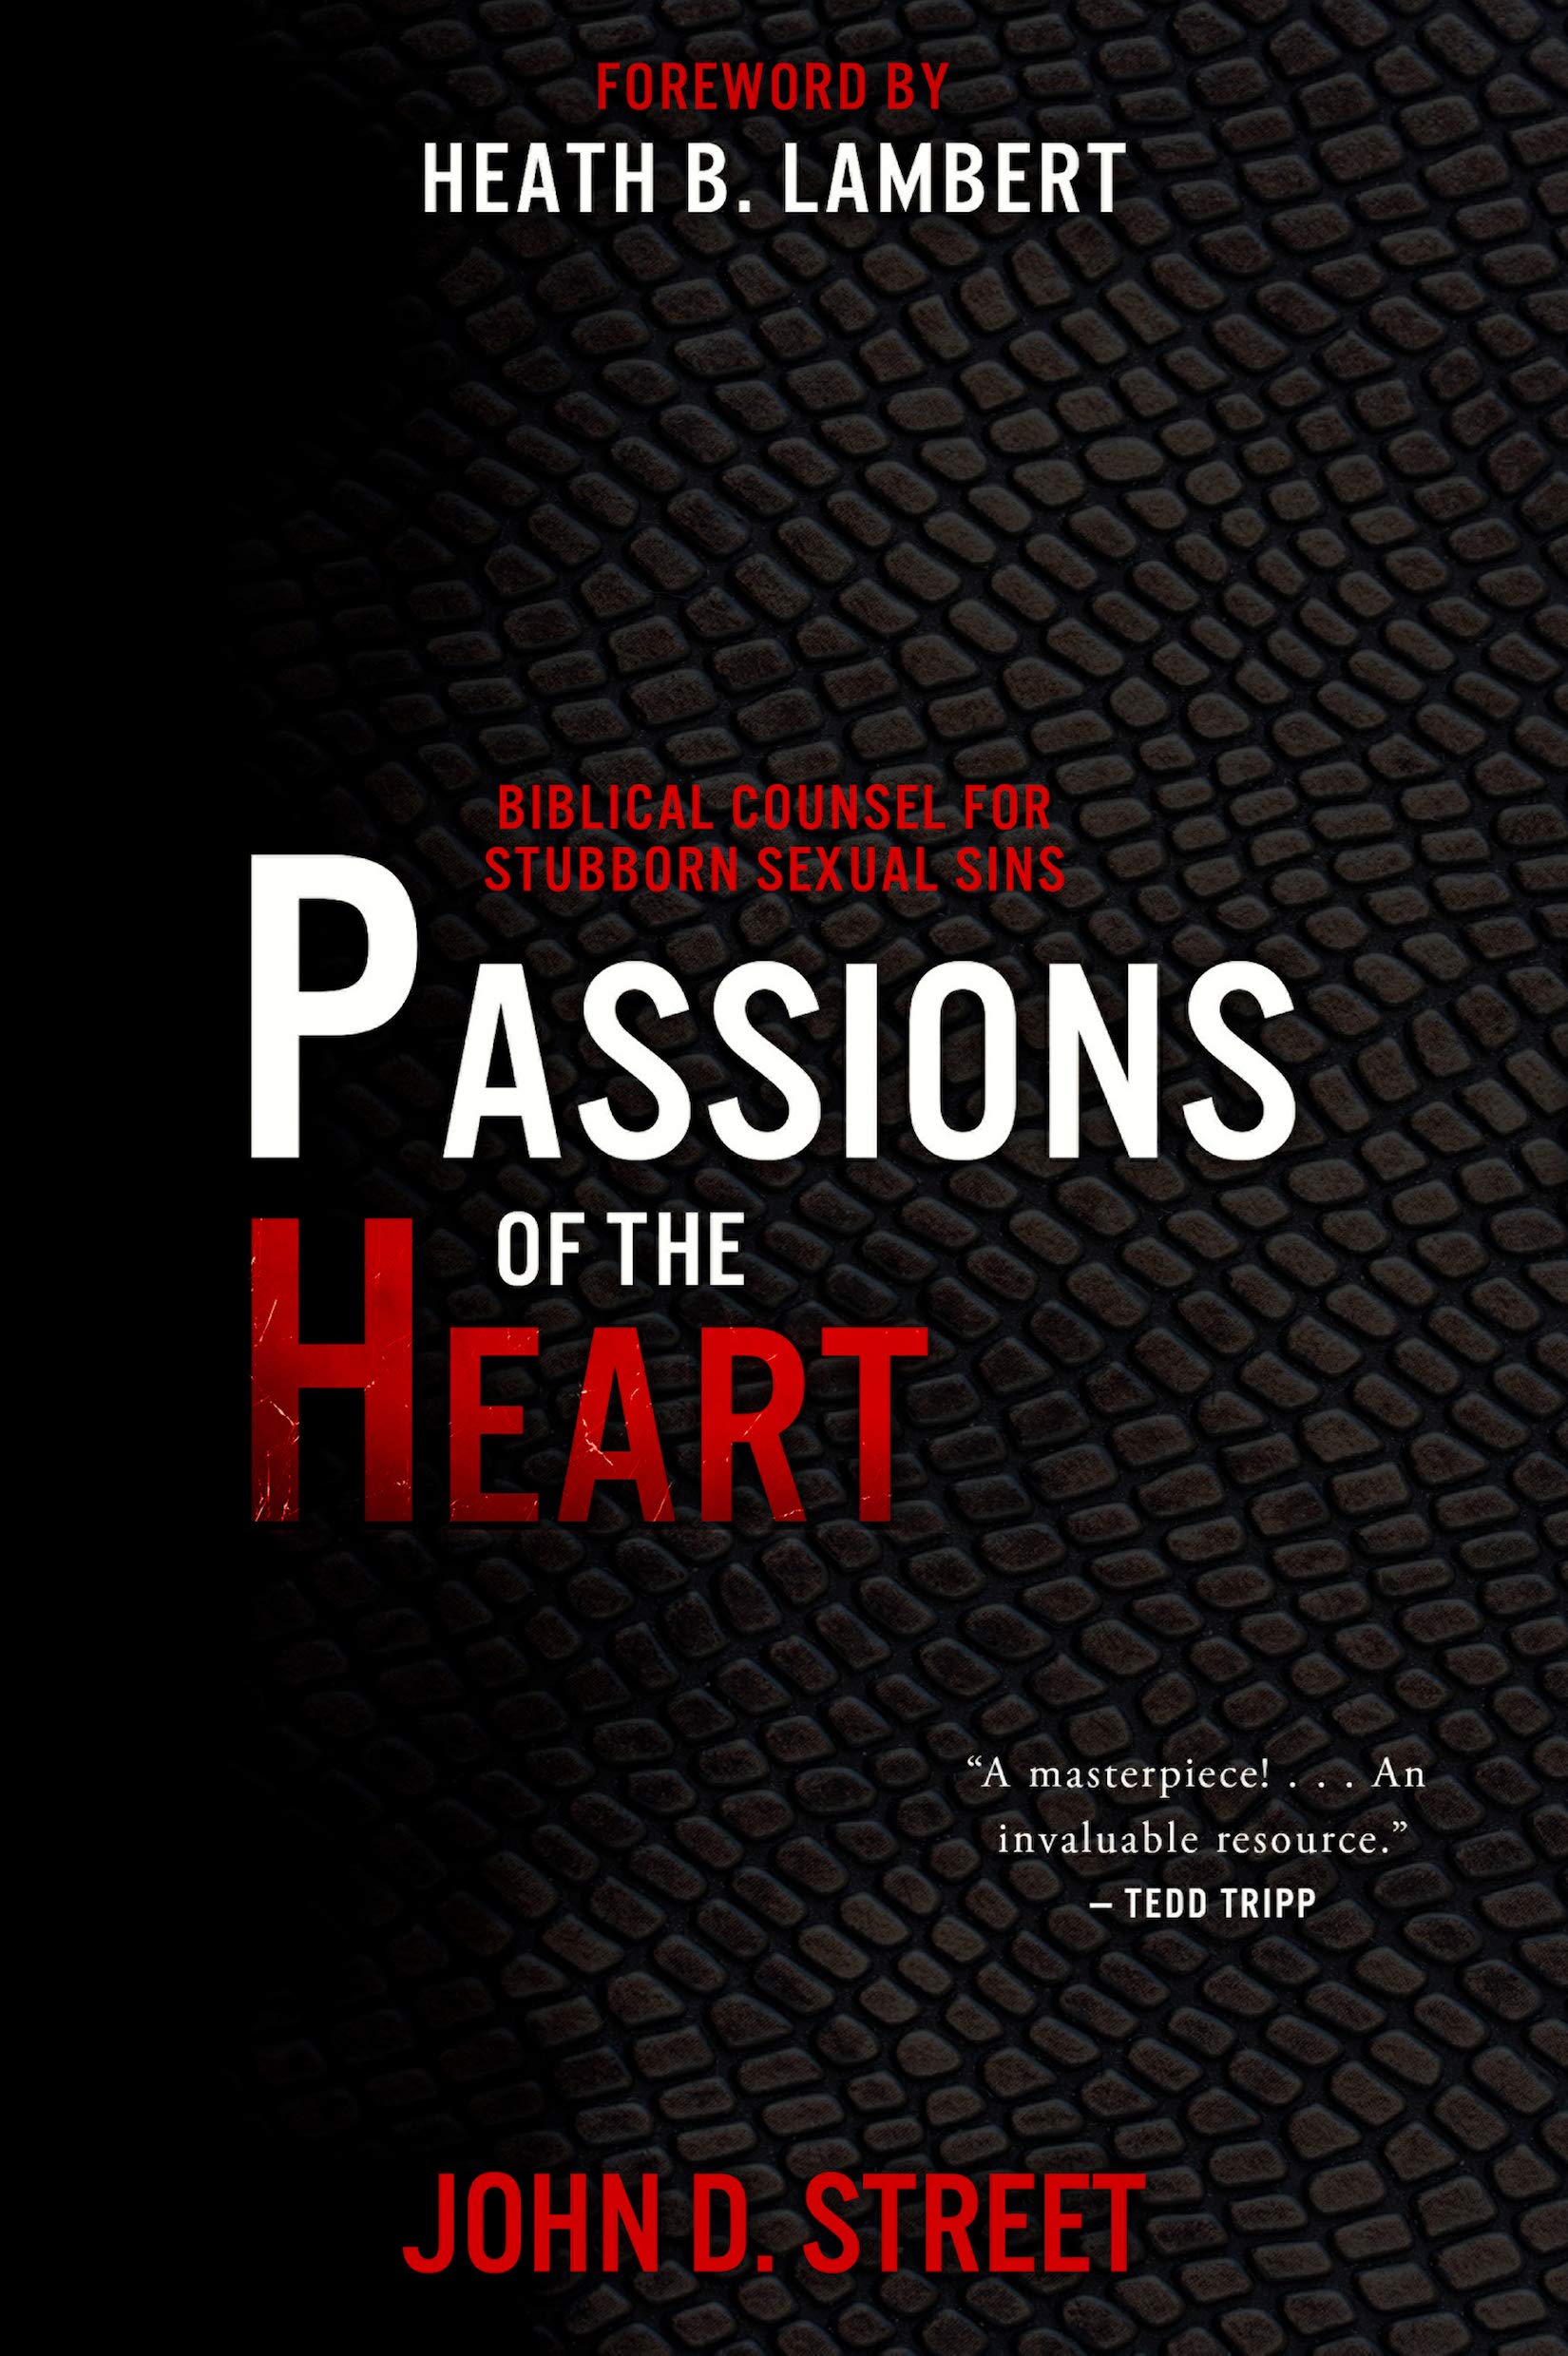 Book Notice: PASSIONS OF THE HEART: BIBLICAL COUNSEL FOR STUBBORN SEXUAL SINS, by John D. Street